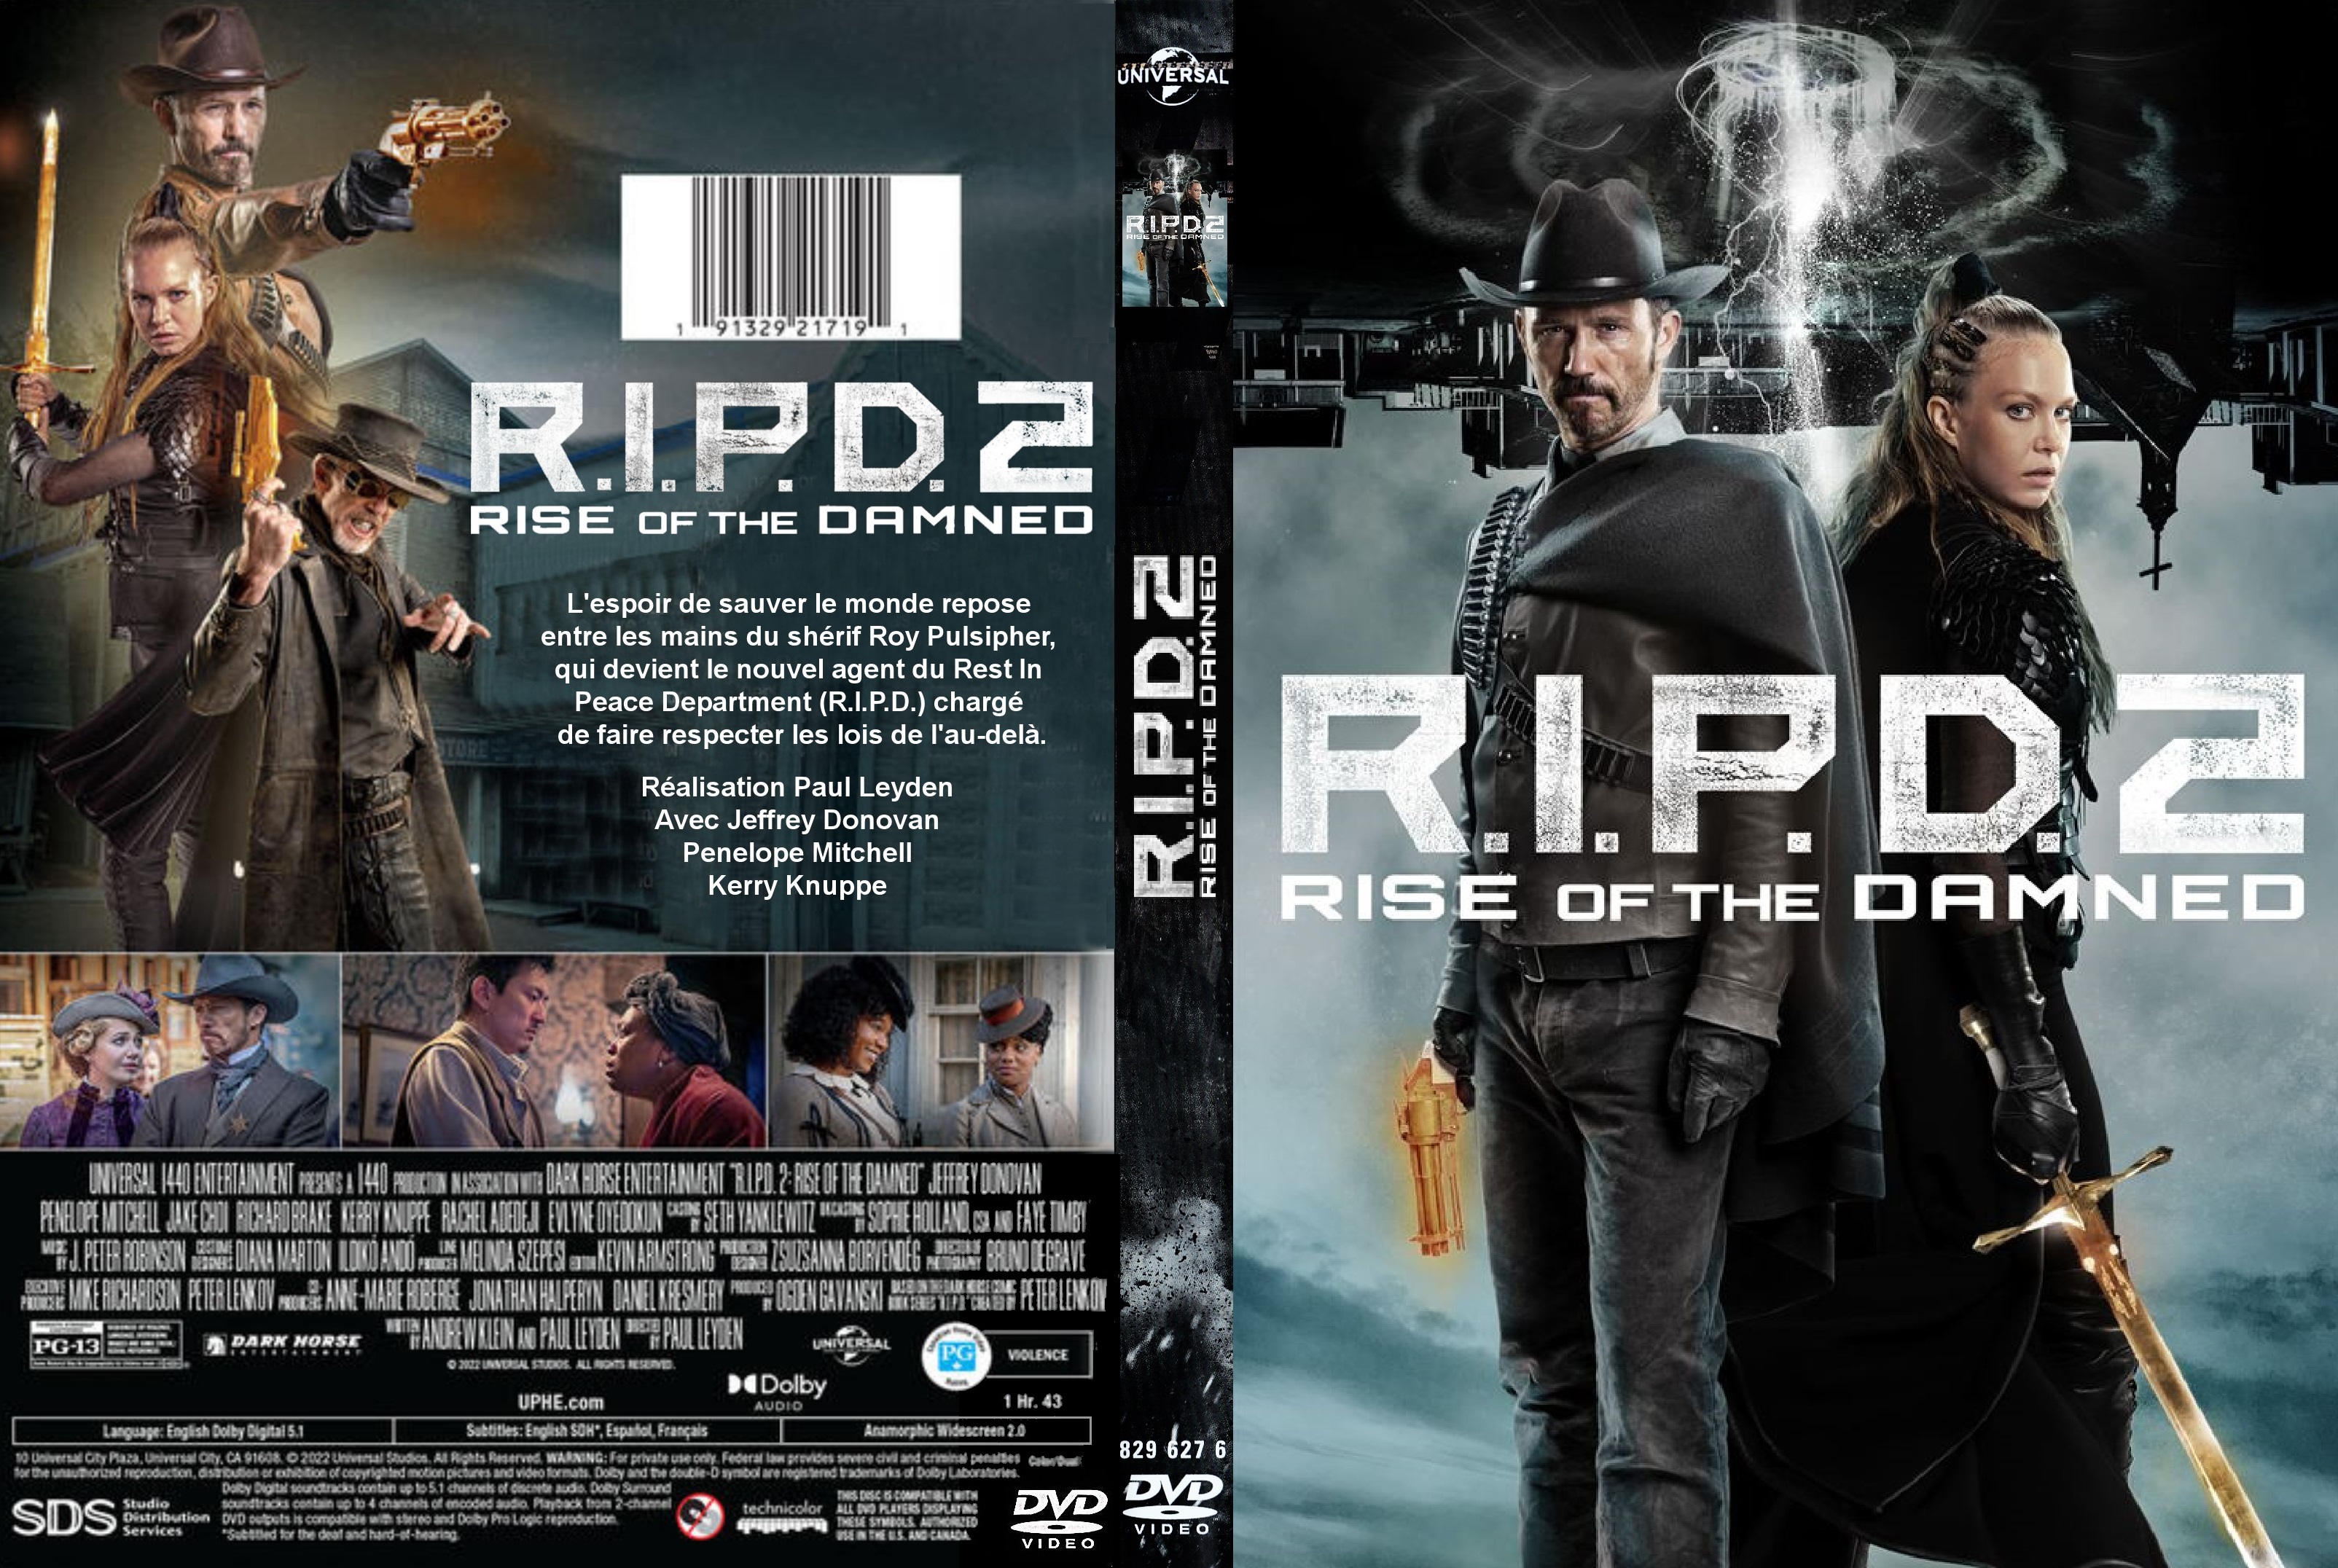 Jaquette DVD RIPD2 Rise of the damned custom